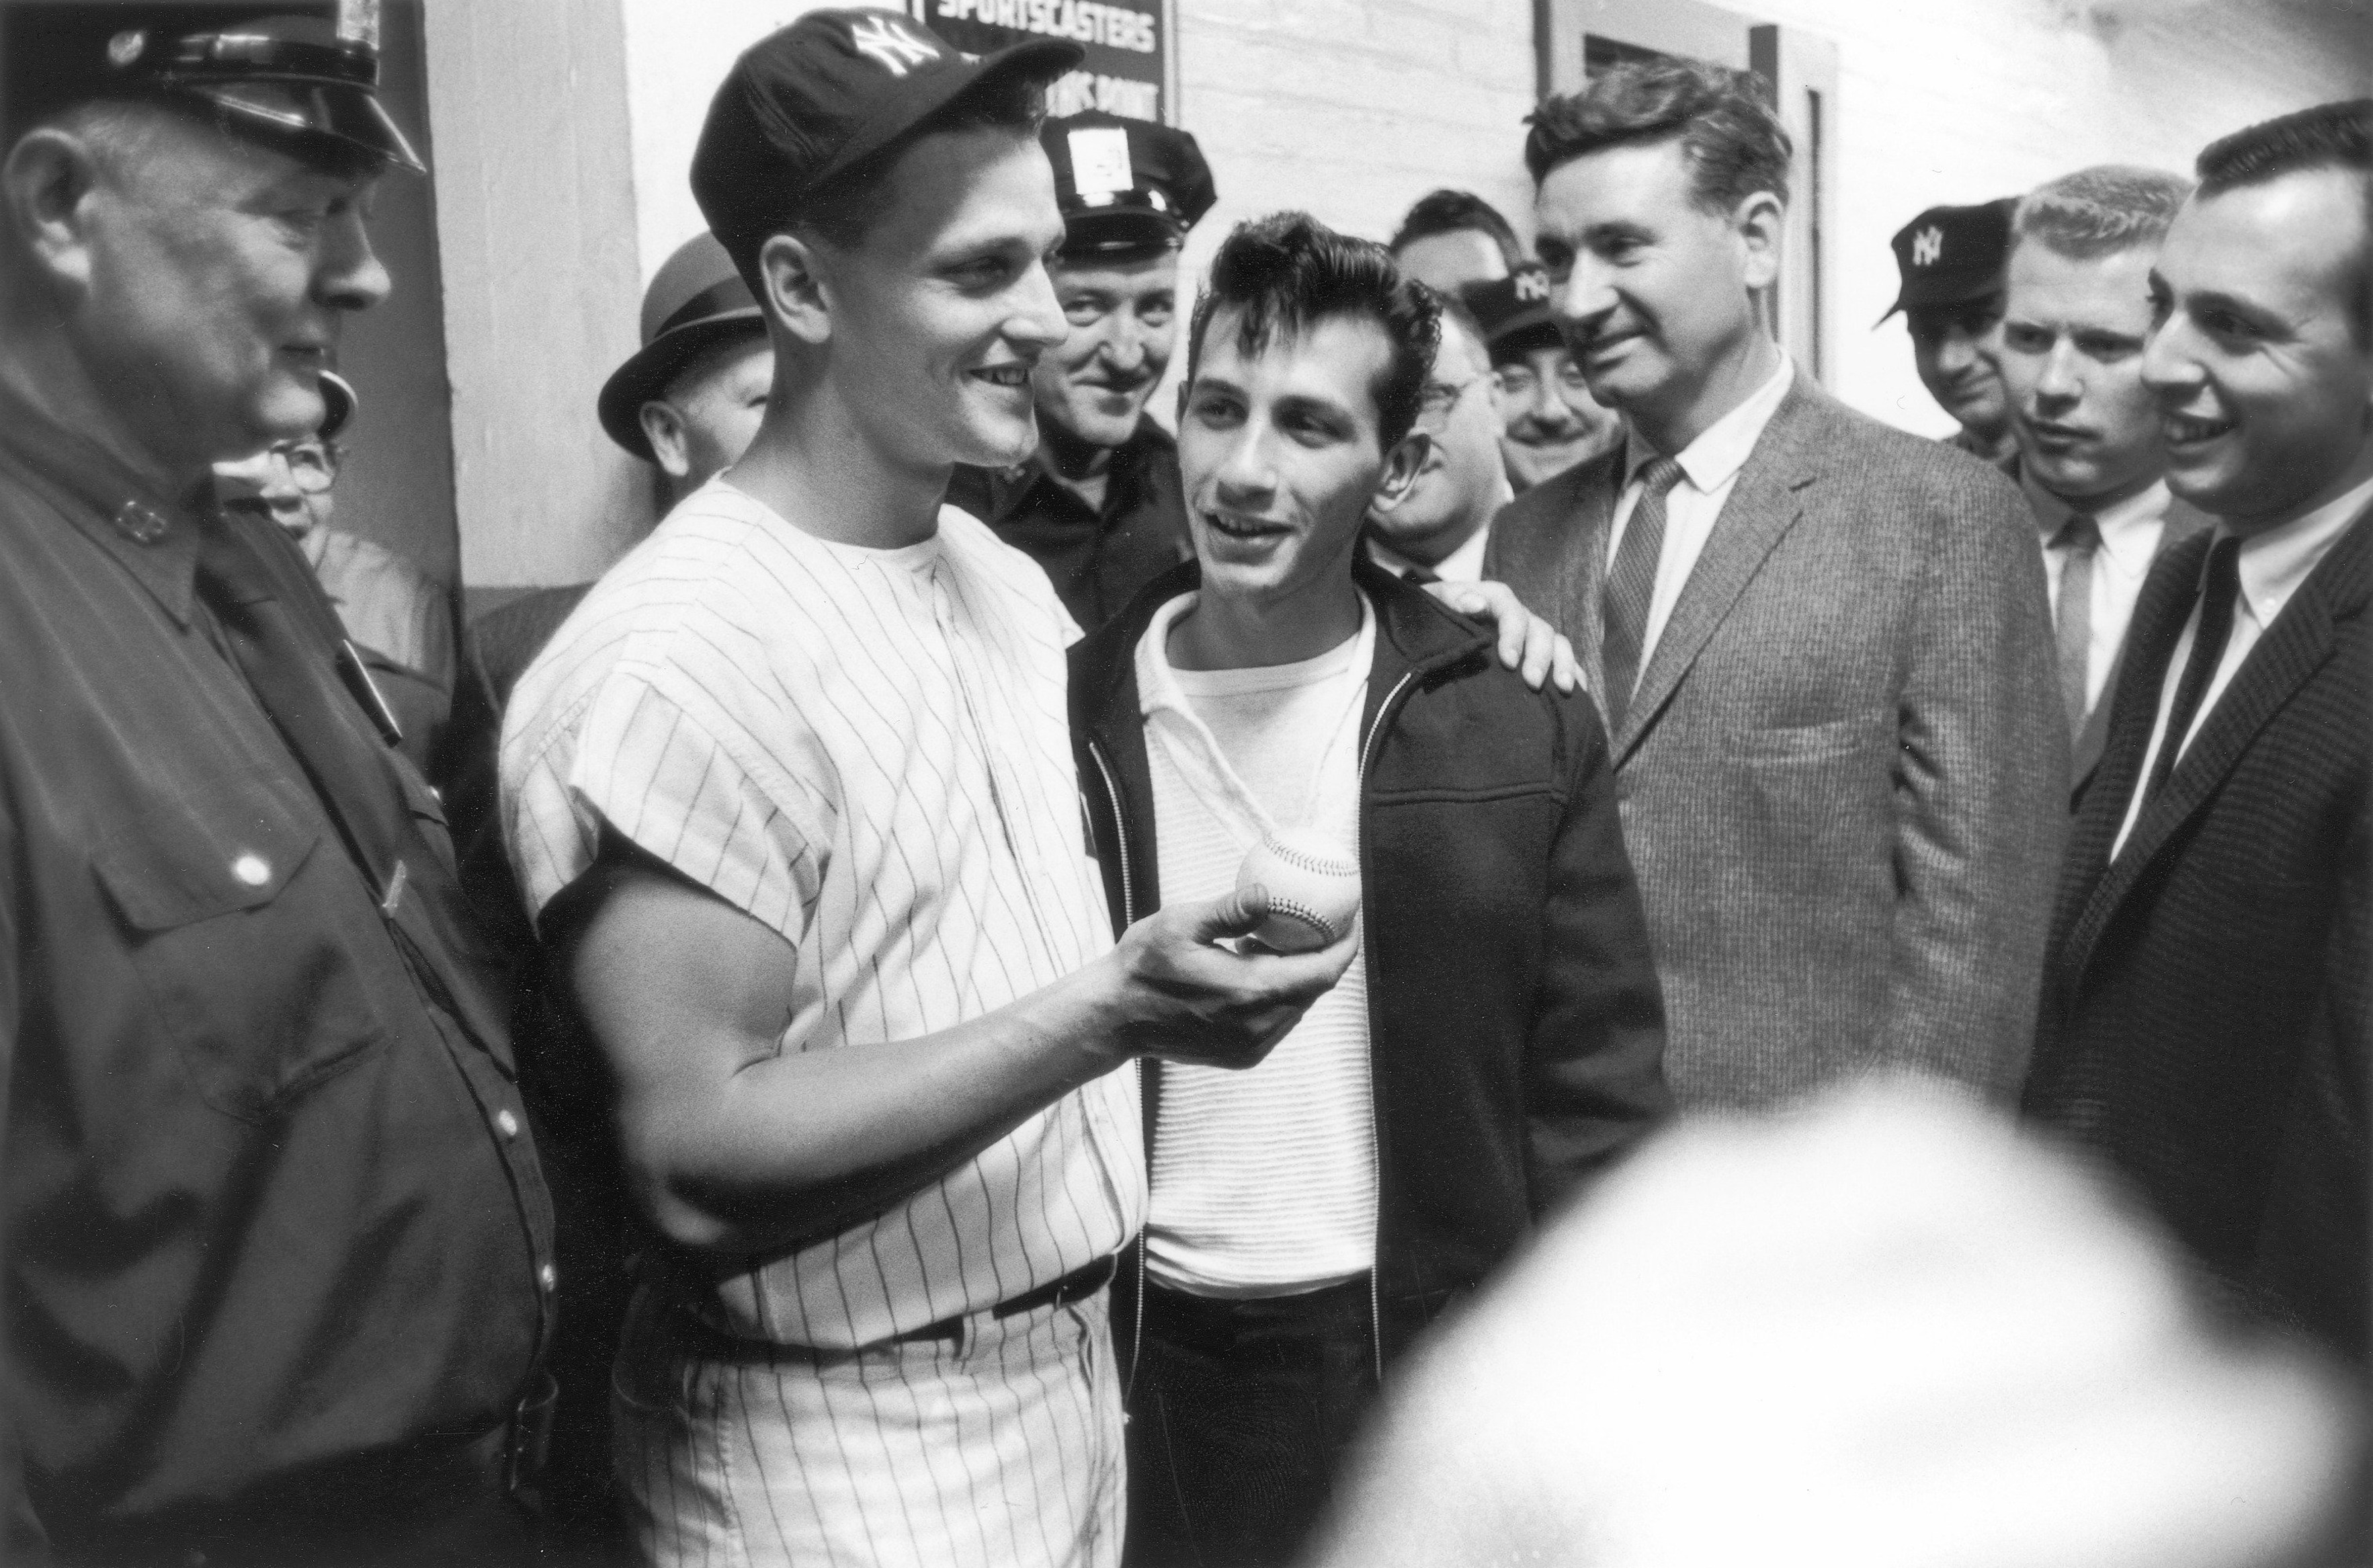 Sal Durante, the S.I. resident who found the limelight after catching Roger  Maris' 61st homer, has died 